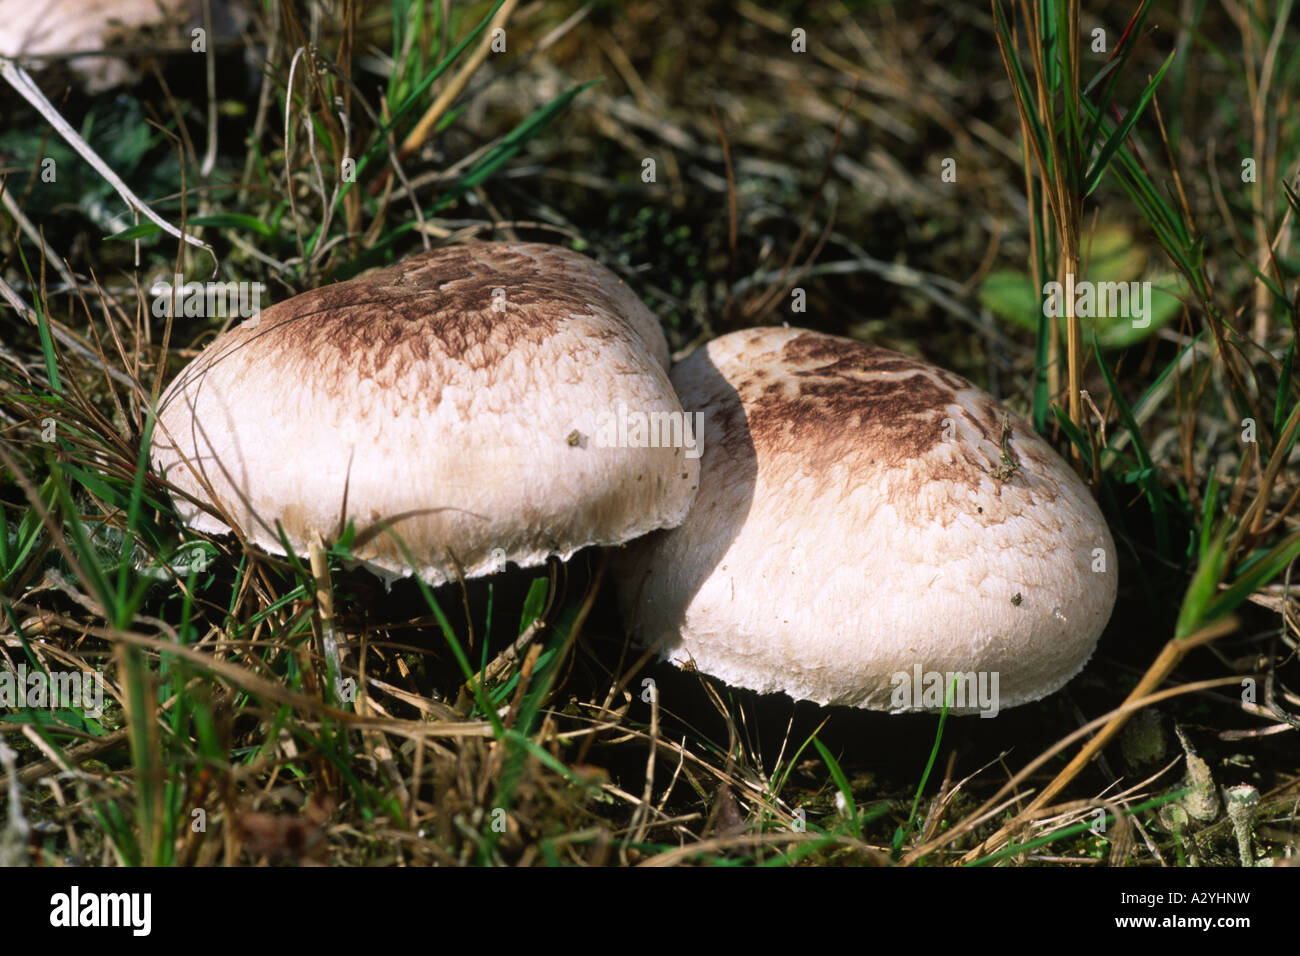 Pavement Mushrooms (Agaricus bitorquis) growing in a footpath. Powys, Wales, UK. Stock Photo